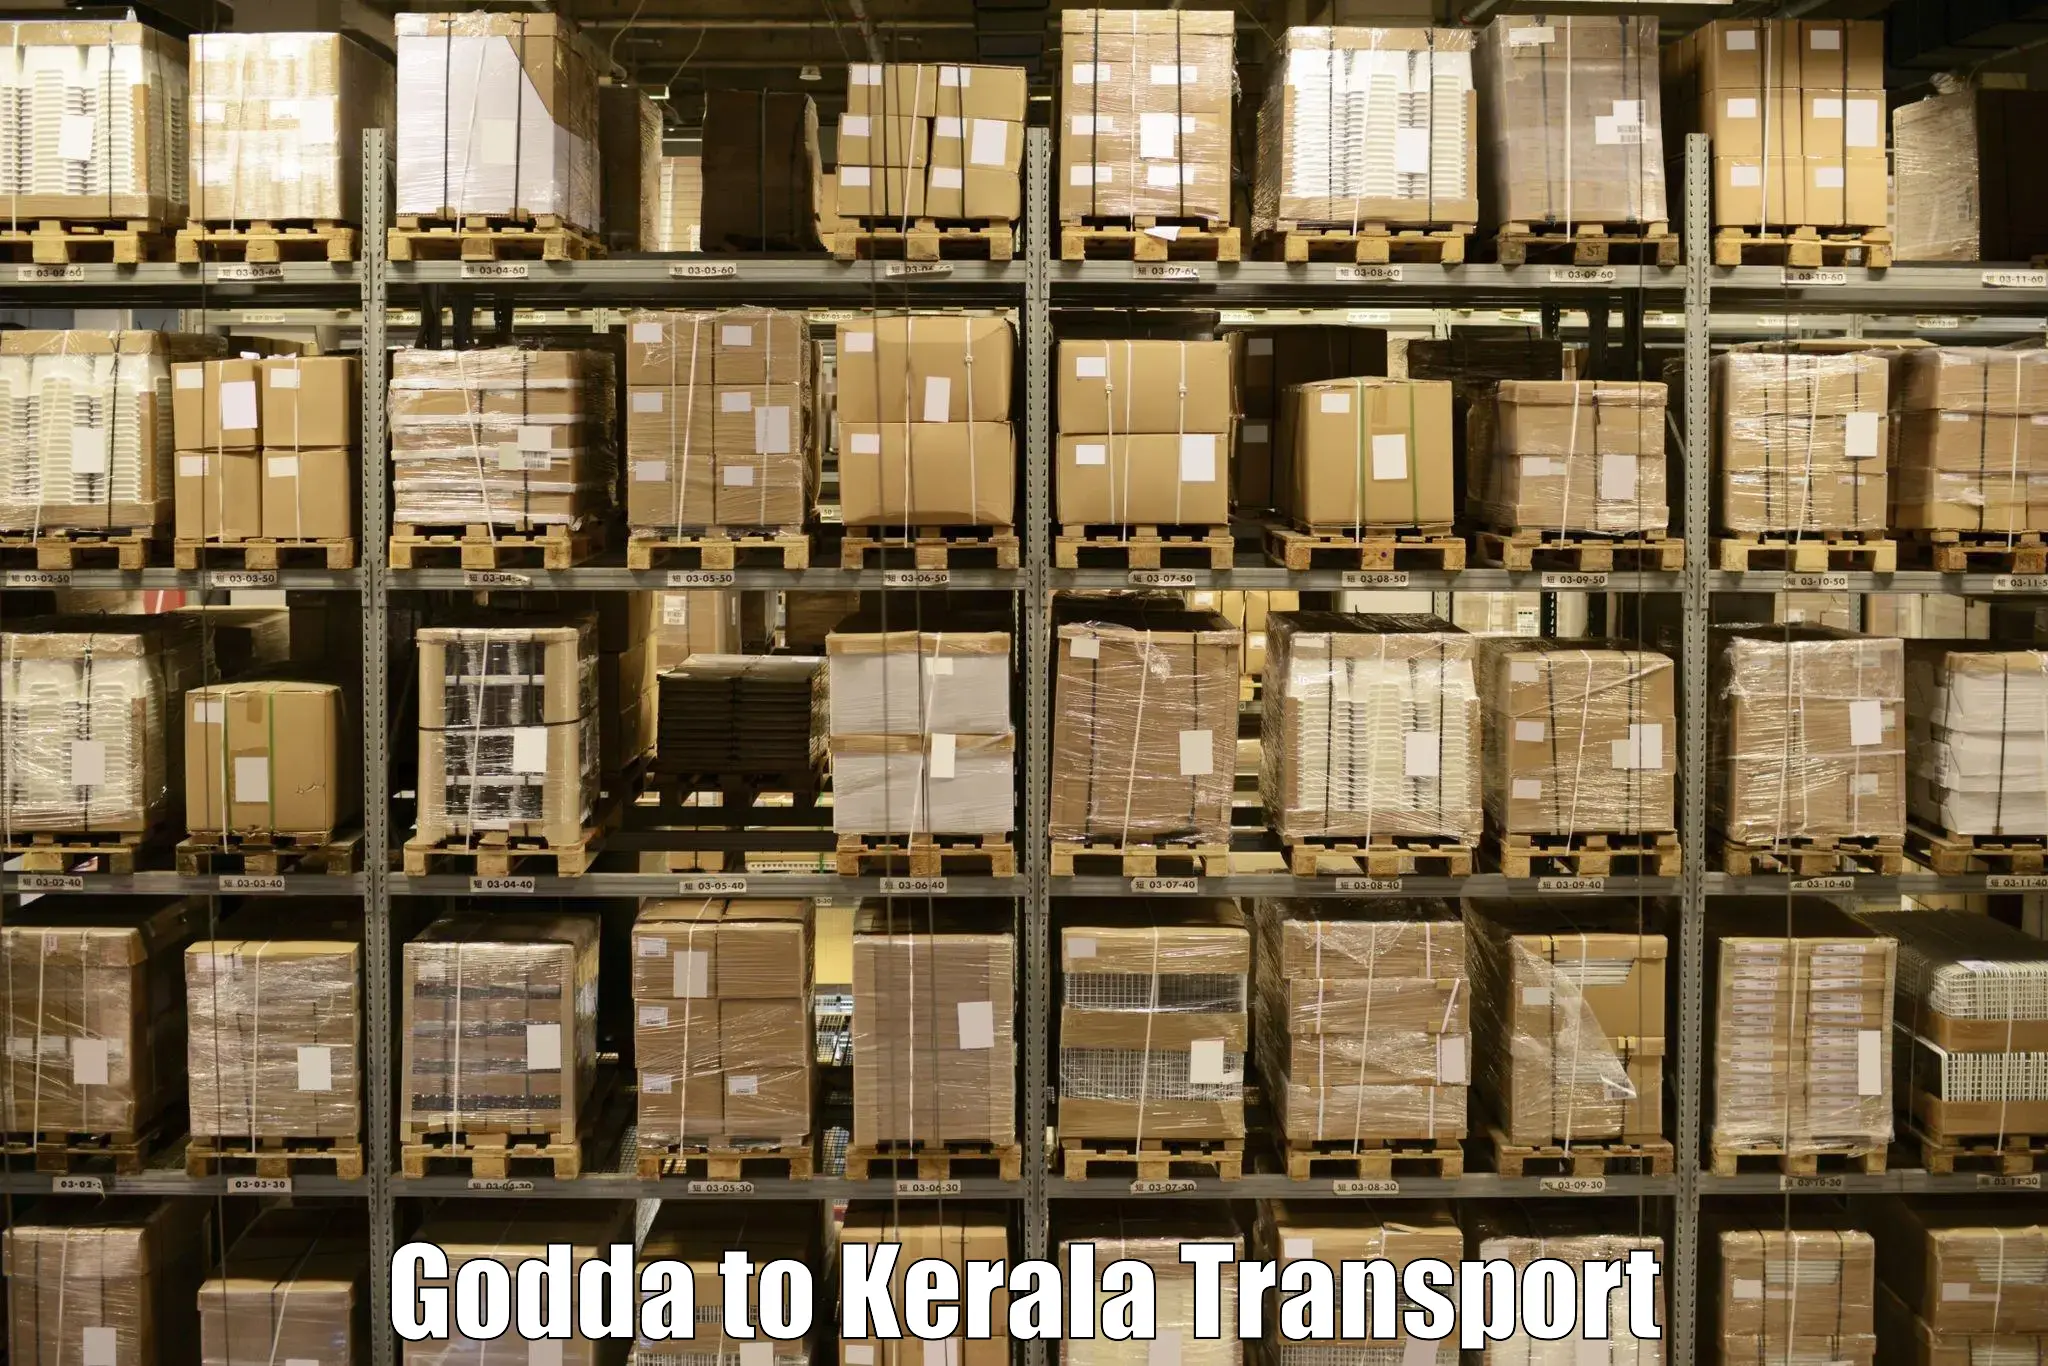 Transport bike from one state to another Godda to Thamarassery